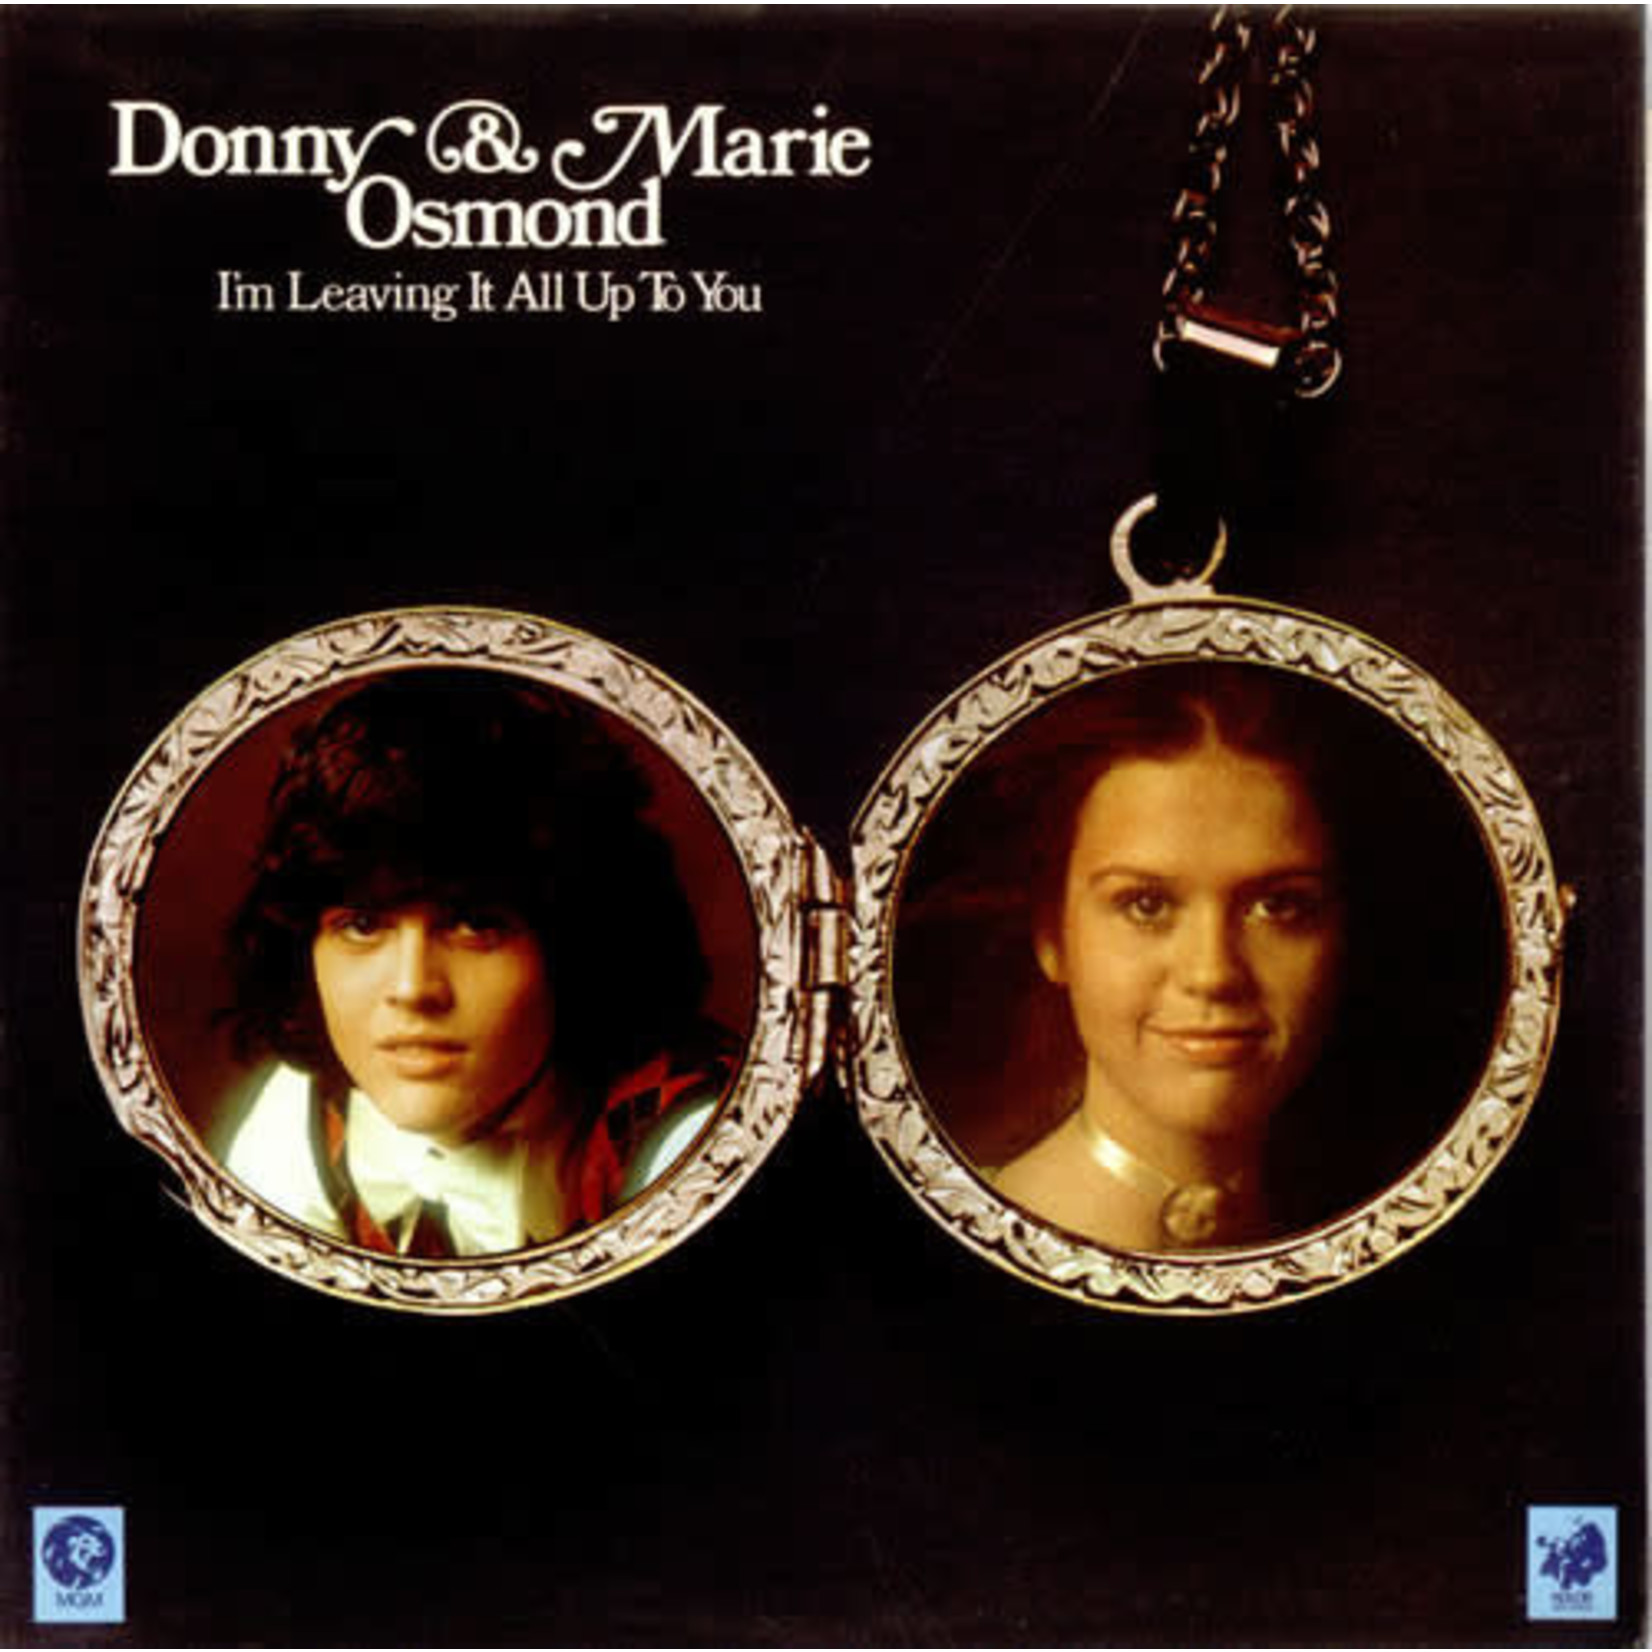 Donny & Marie Osmond Donny & Marie Osmond – I'm Leaving It All Up To You (VG, 1974, LP, MGM / Kolob Records – SE 4968, Canada)